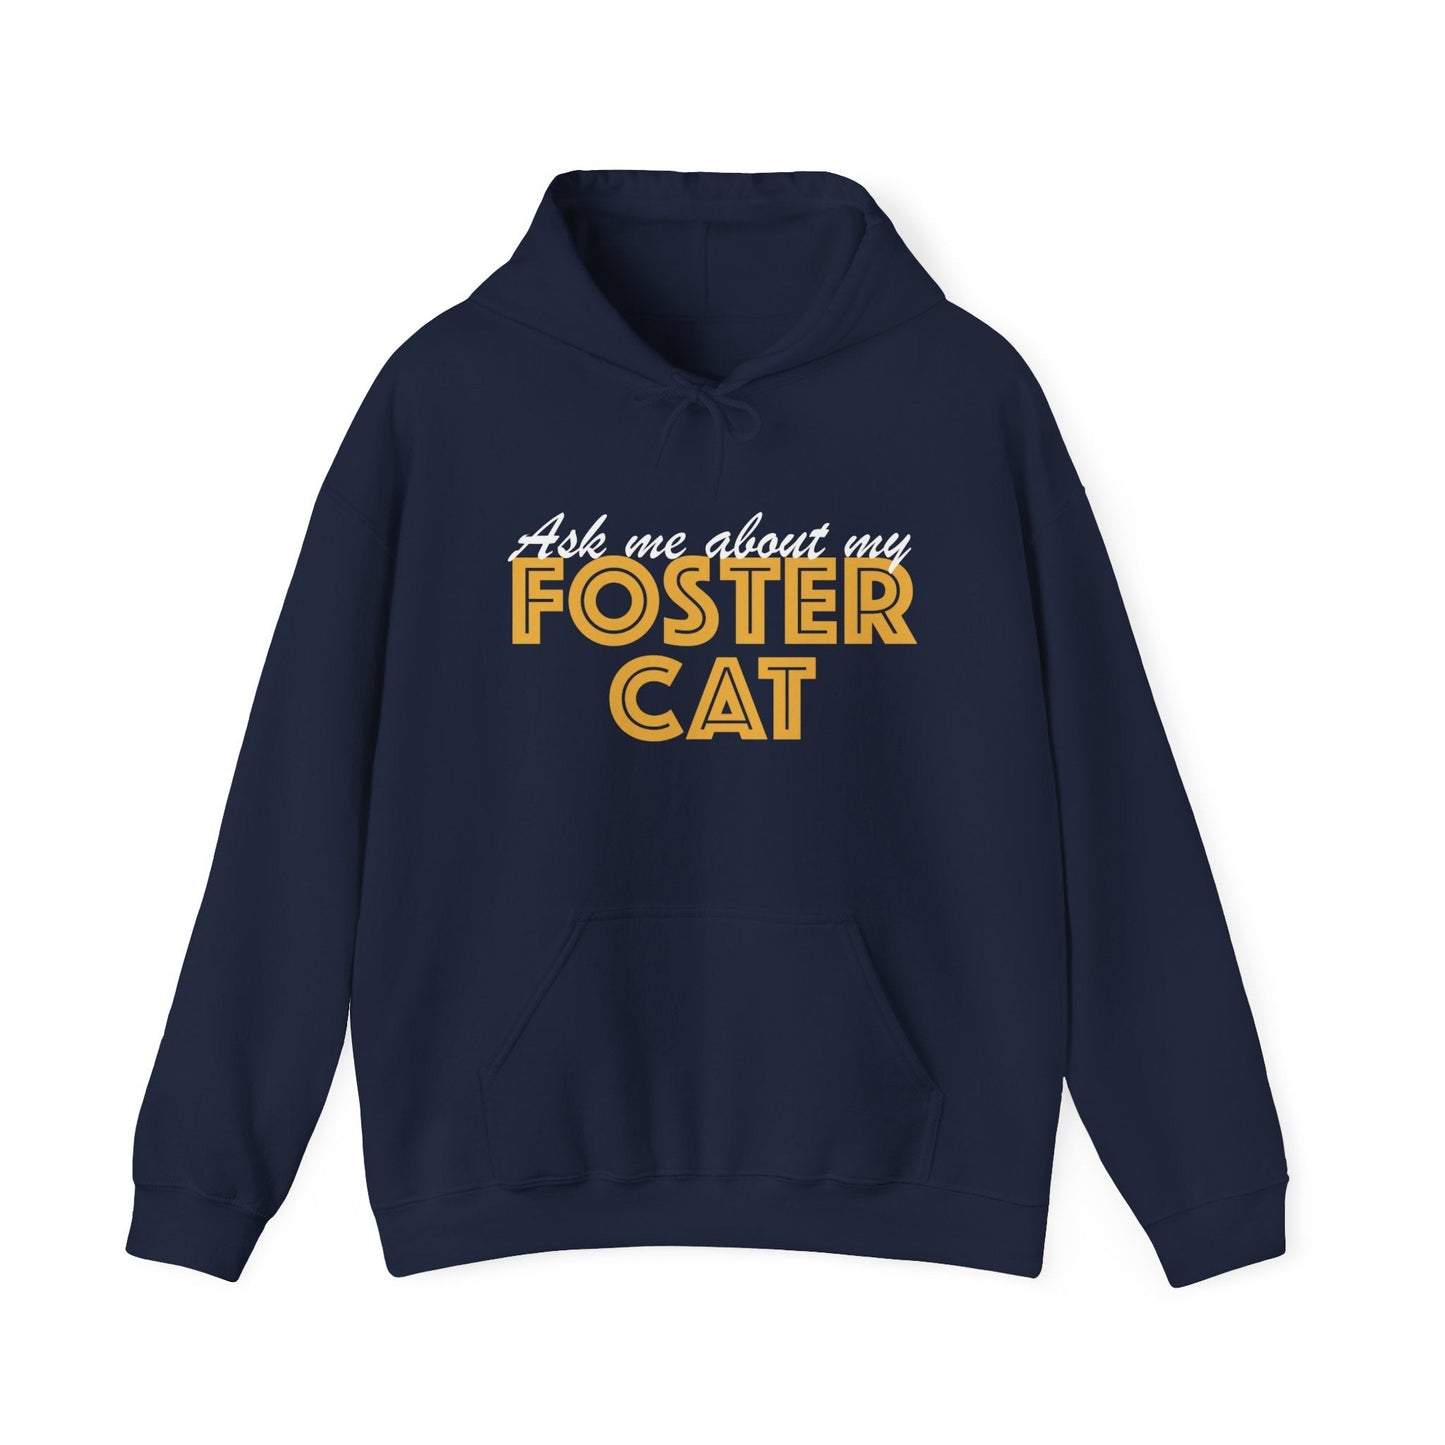 Ask Me About My Foster Cat | Hooded Sweatshirt - Detezi Designs-21075940153692034573